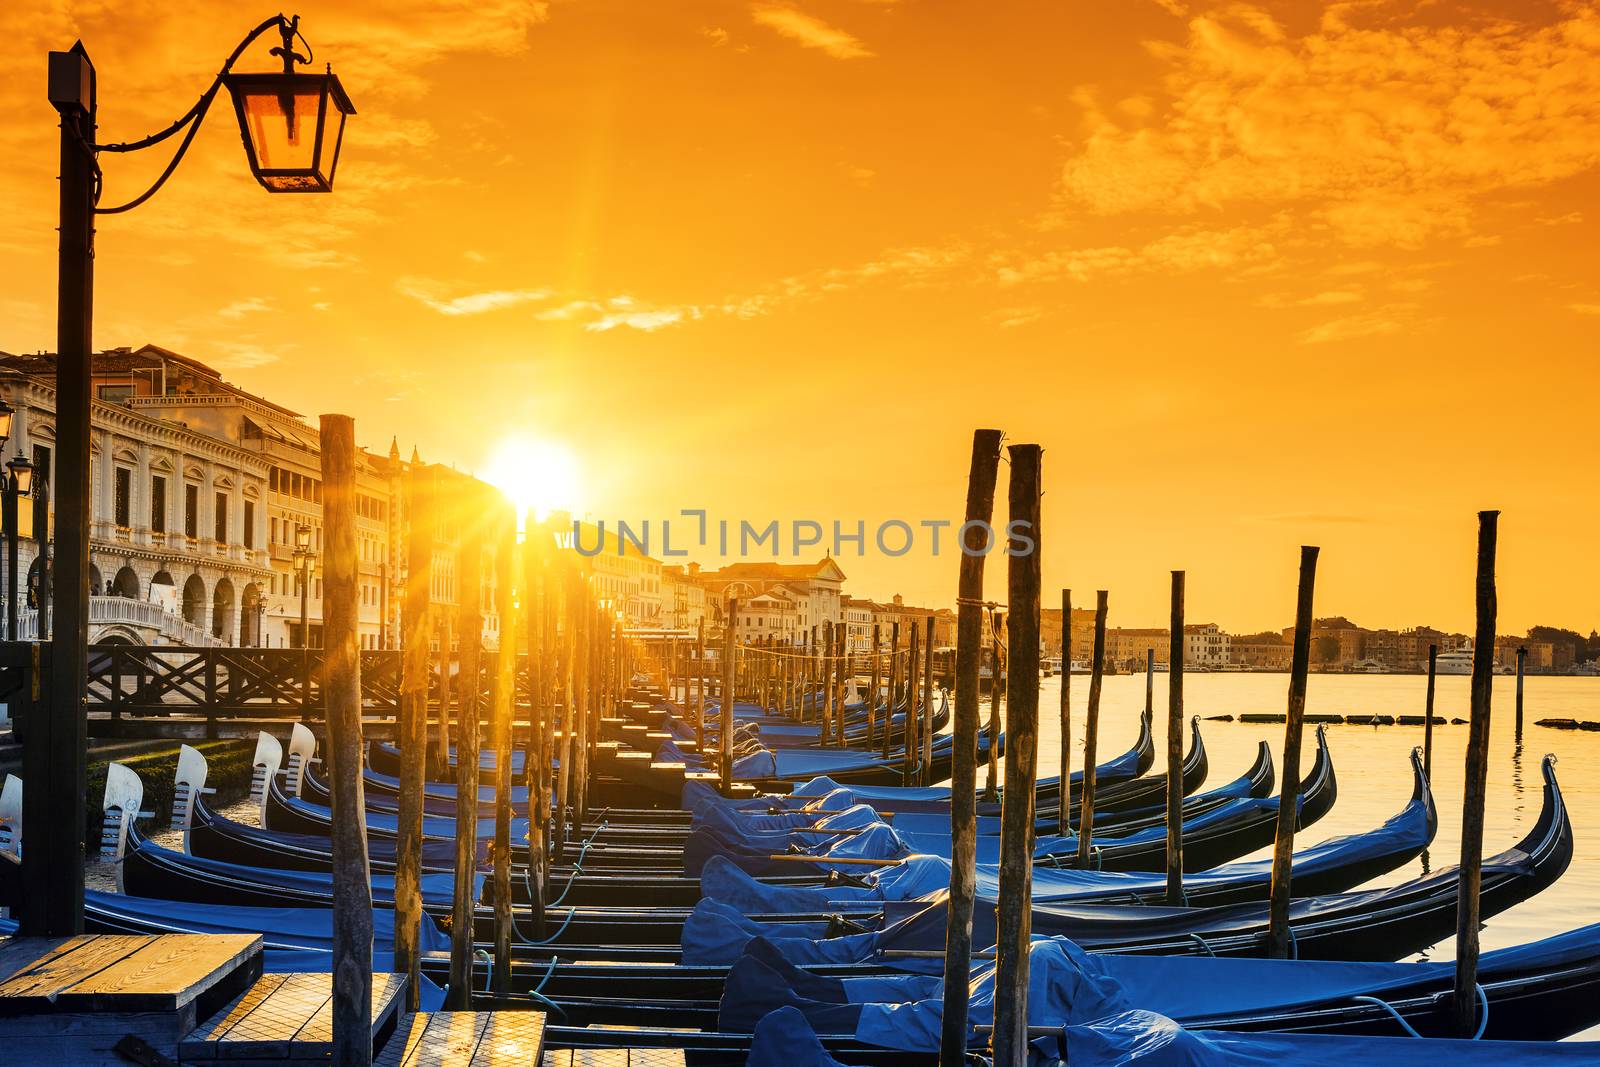 View of Venice with gondolas at sunrise